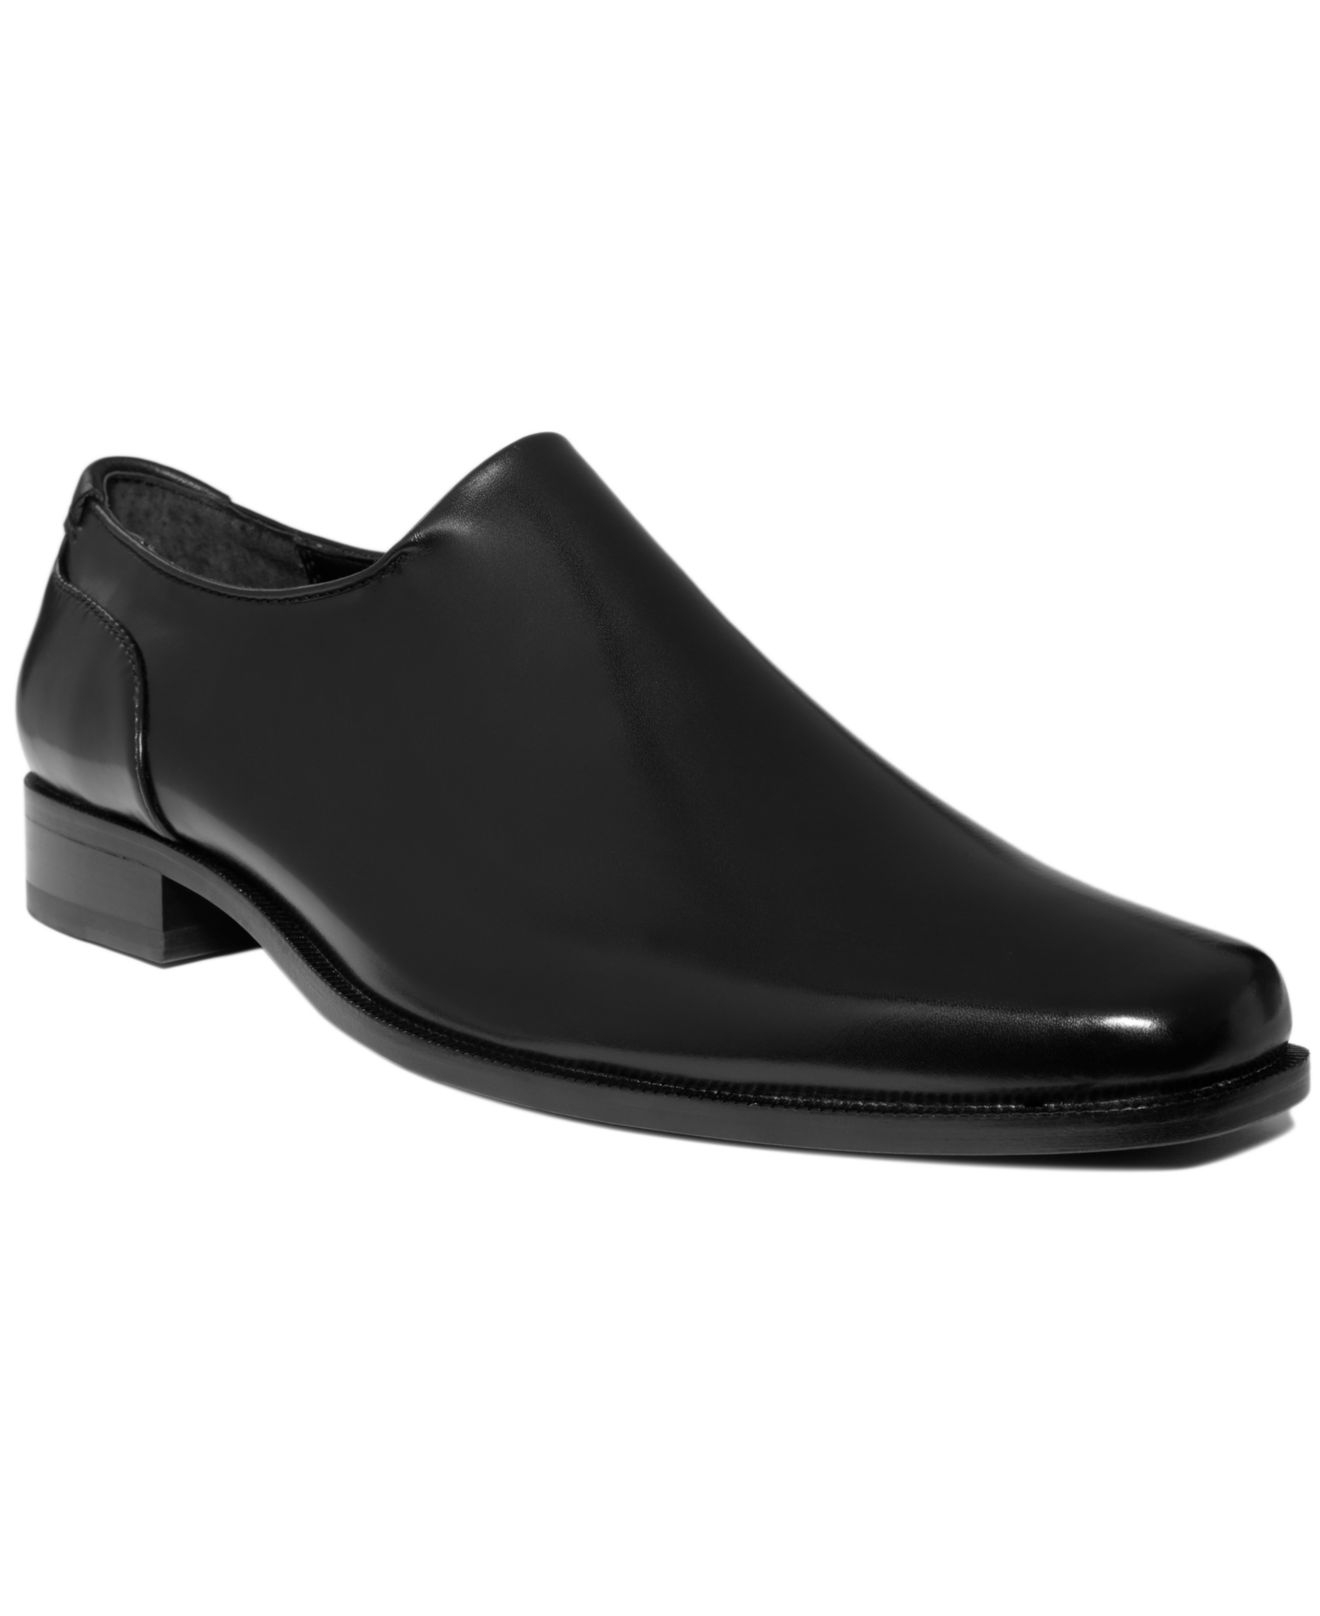 Lyst - Calvin Klein Water-resistant Malcolm Stretch Vamp Loafers in ...